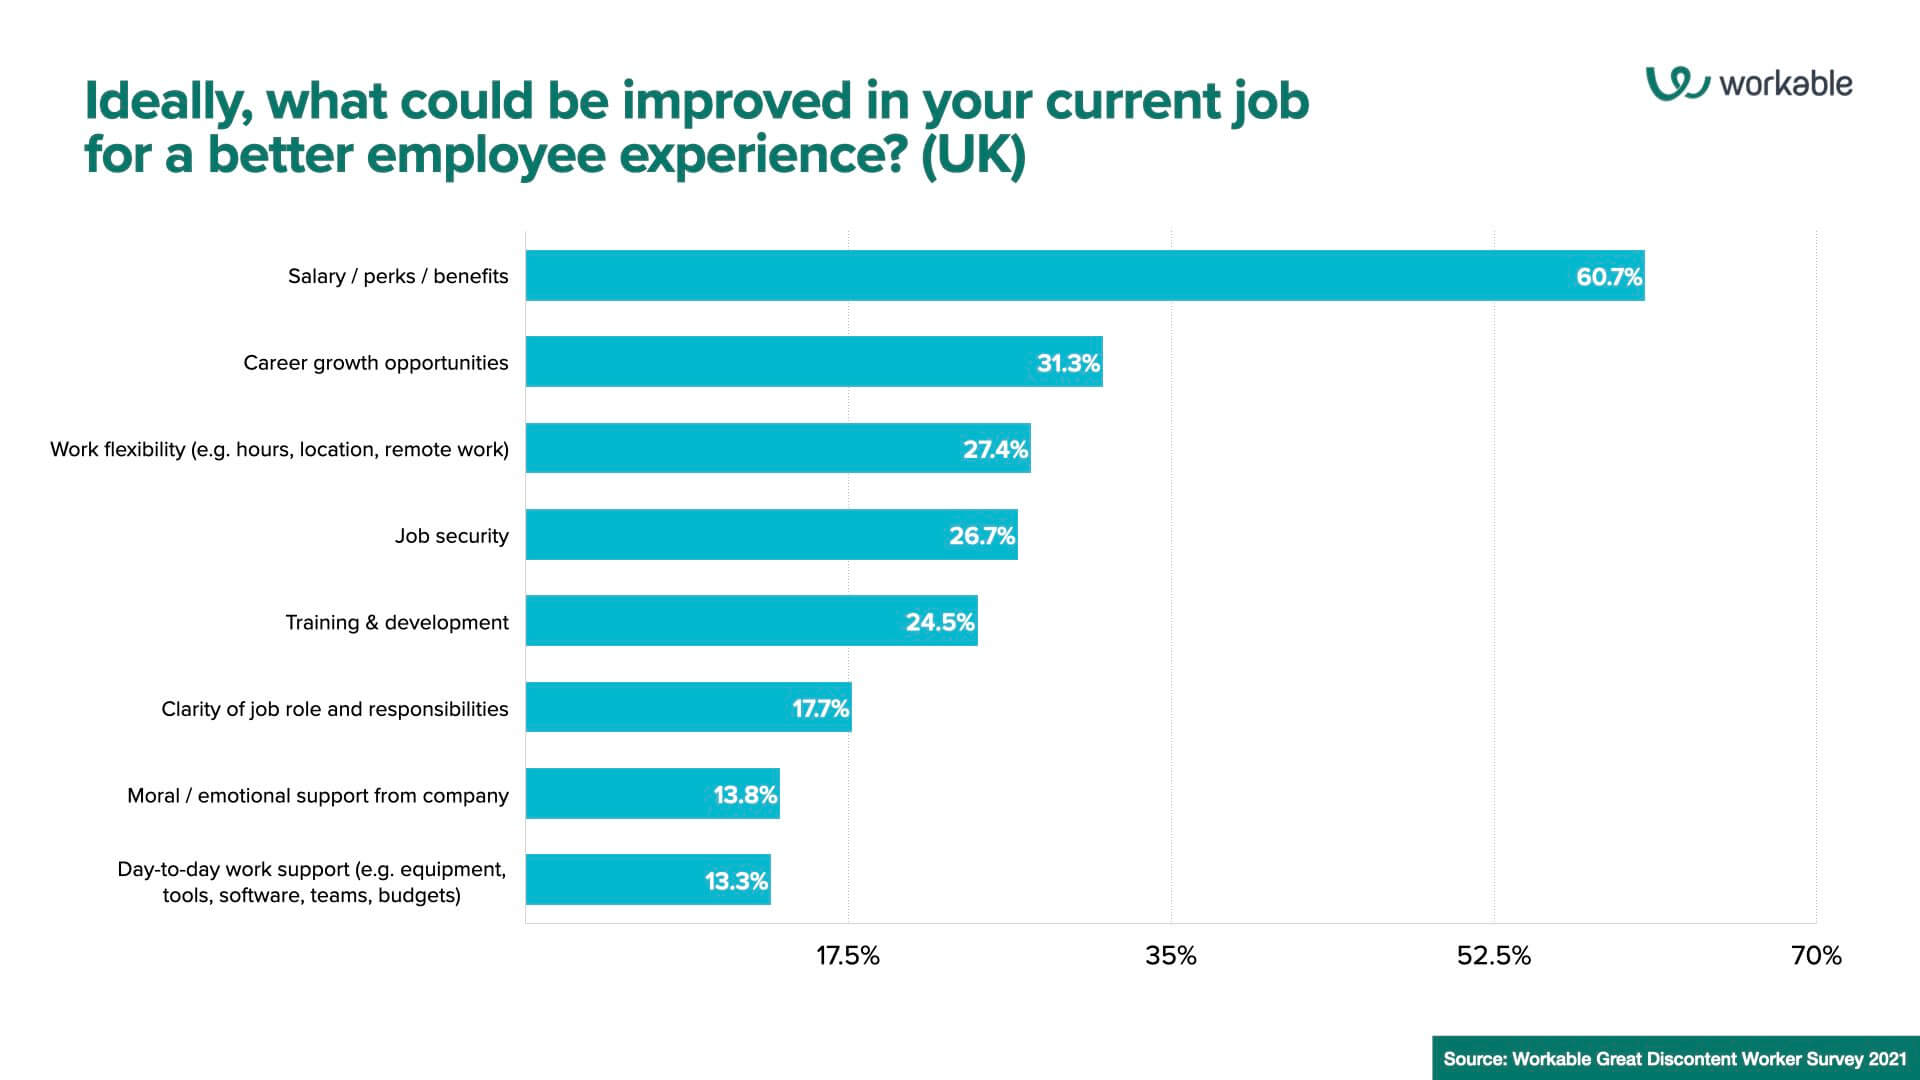 Ideally, what could be improved in your current job for a better employee experience? (UK)